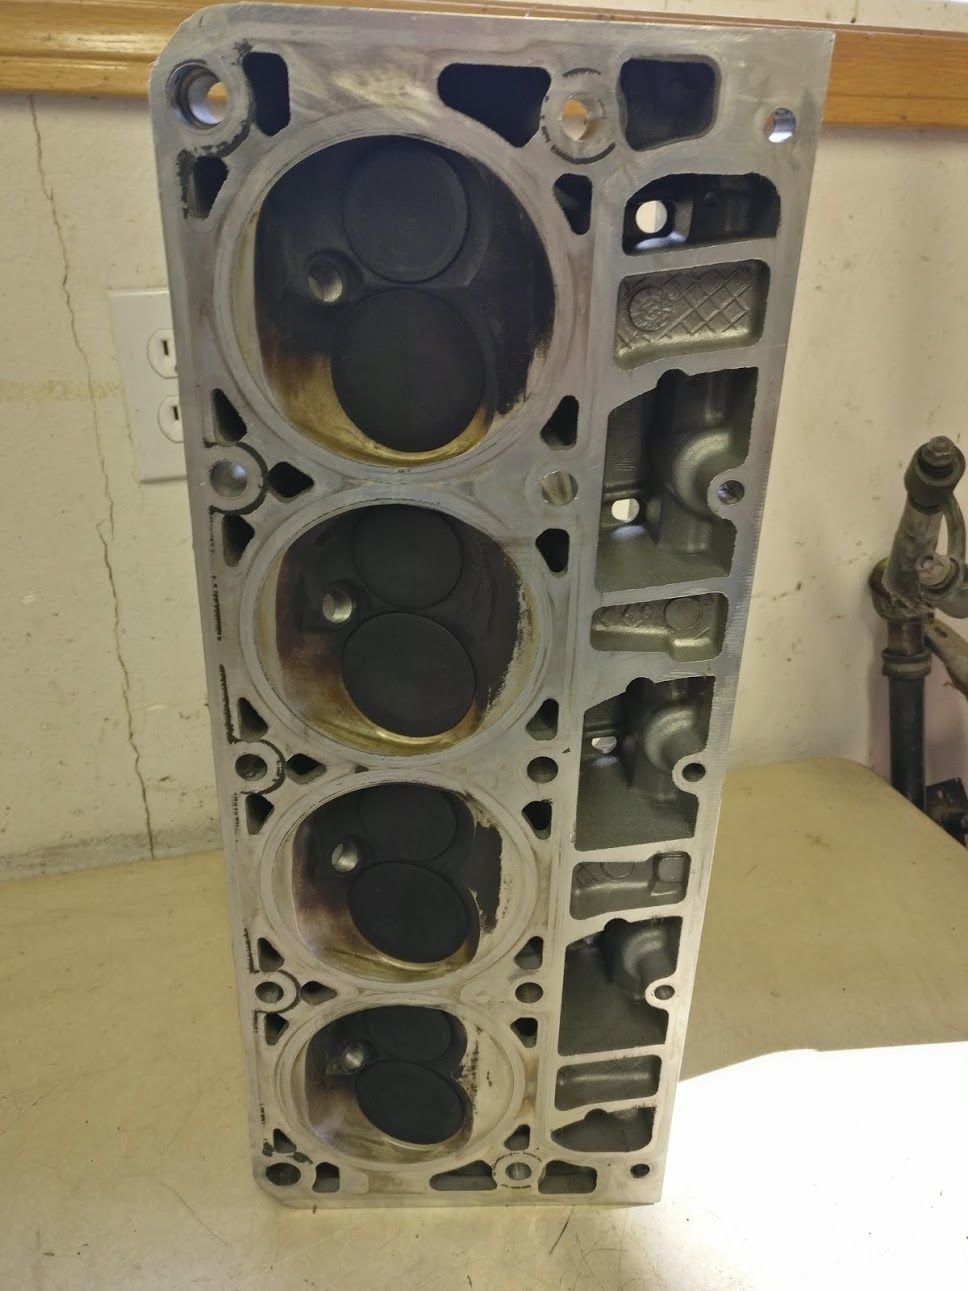  - 243 Absolute Speed heads Stage 2.5 CNC (need repair) - Mulino, OR 97042, United States